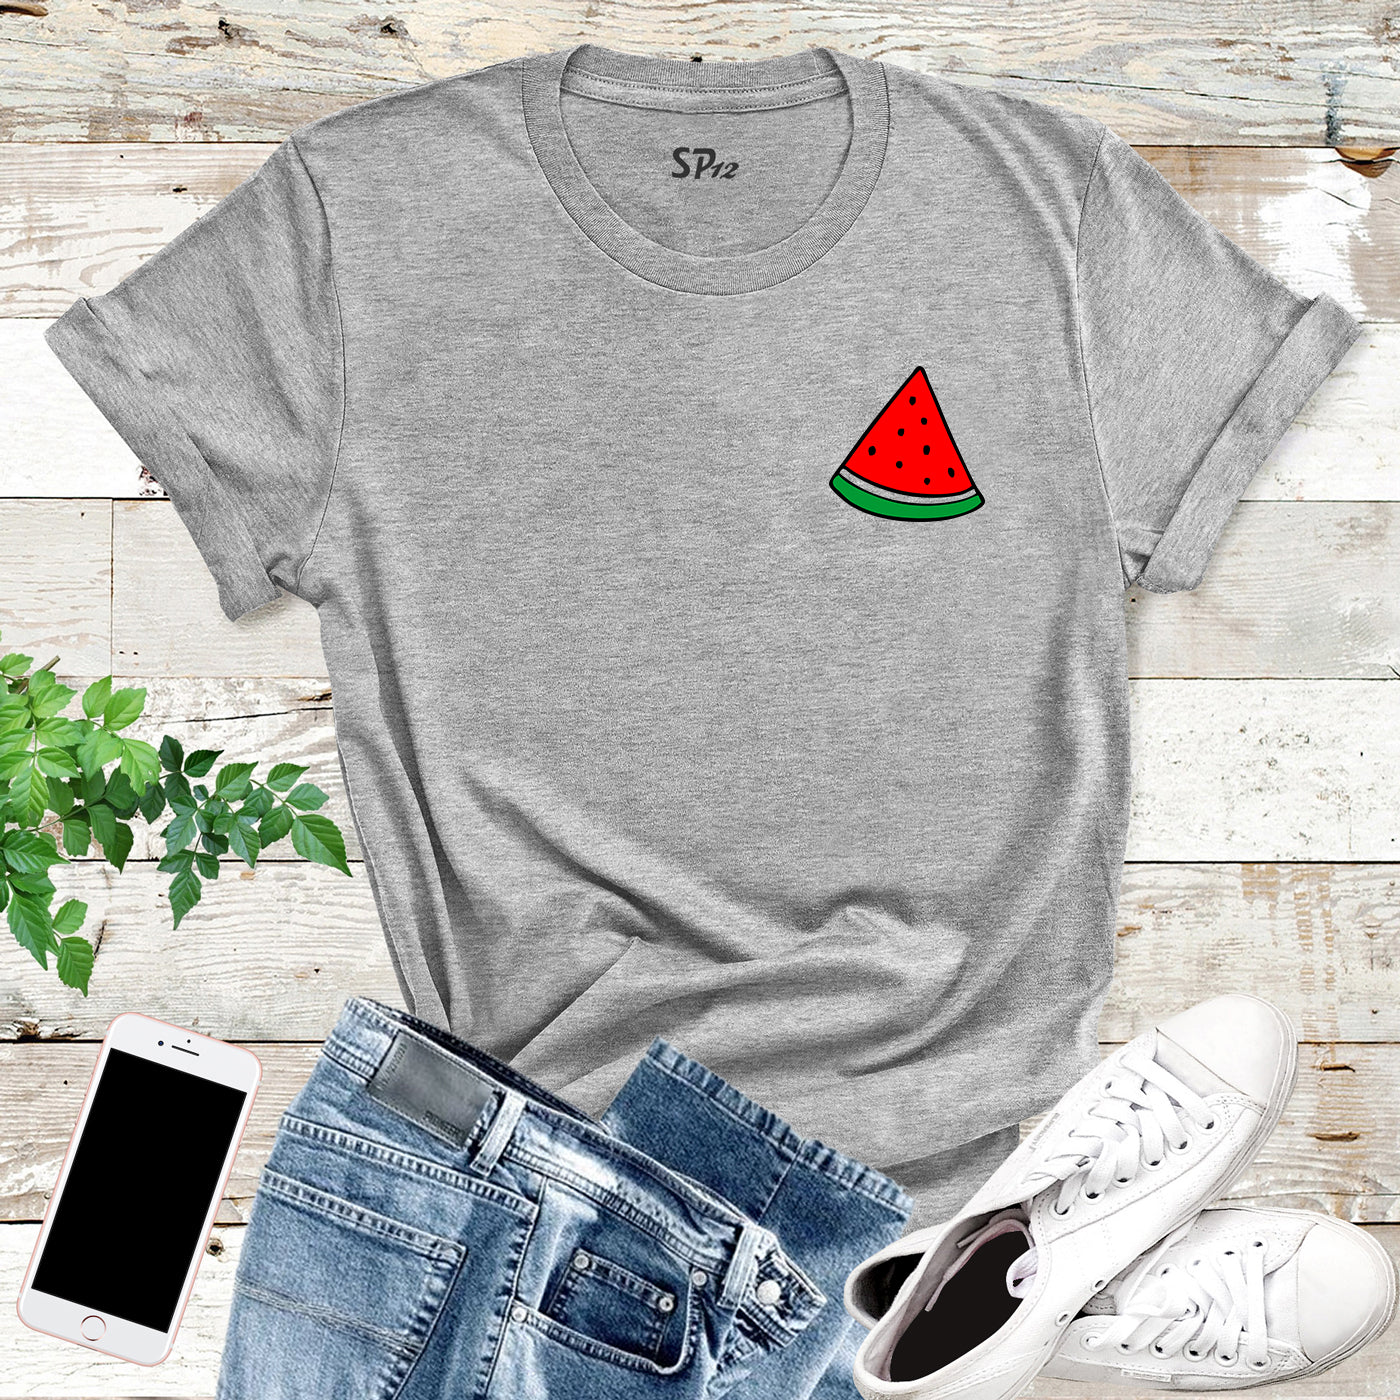 Watermelon Slice Pocket Shirt summer one in a melon Gift tee